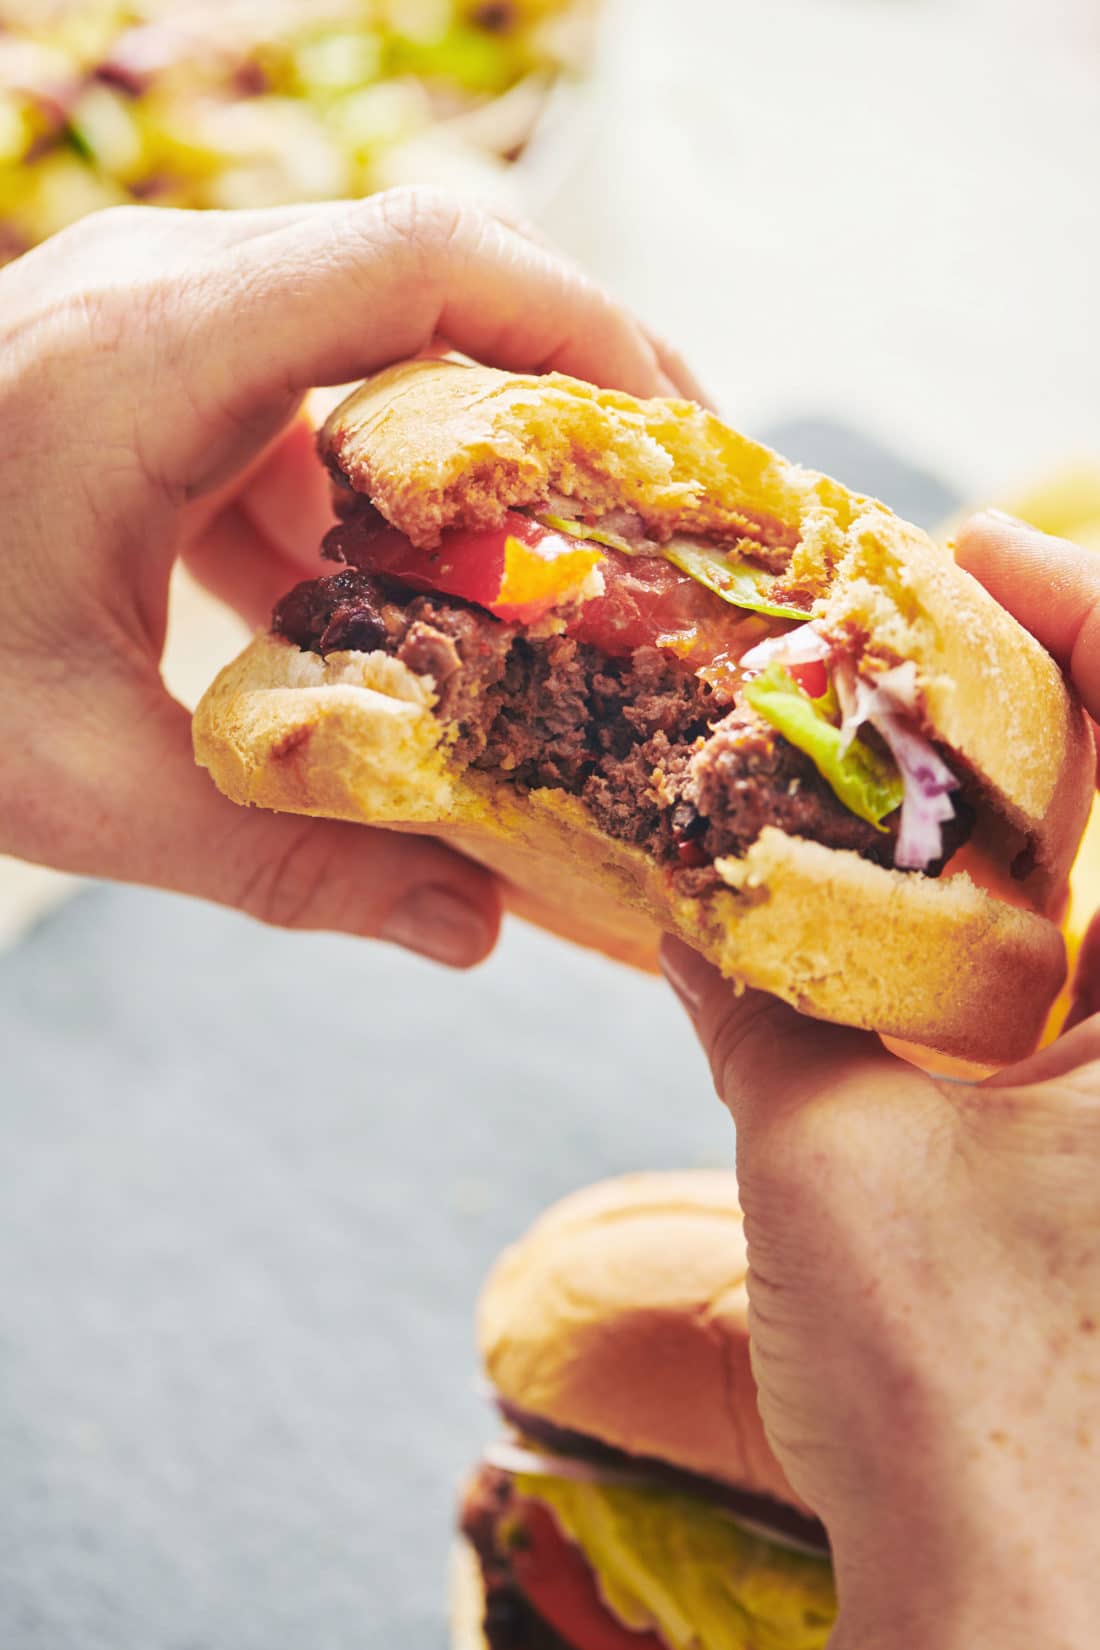 Person holding a Chipotle Beef Burger missing a bite.